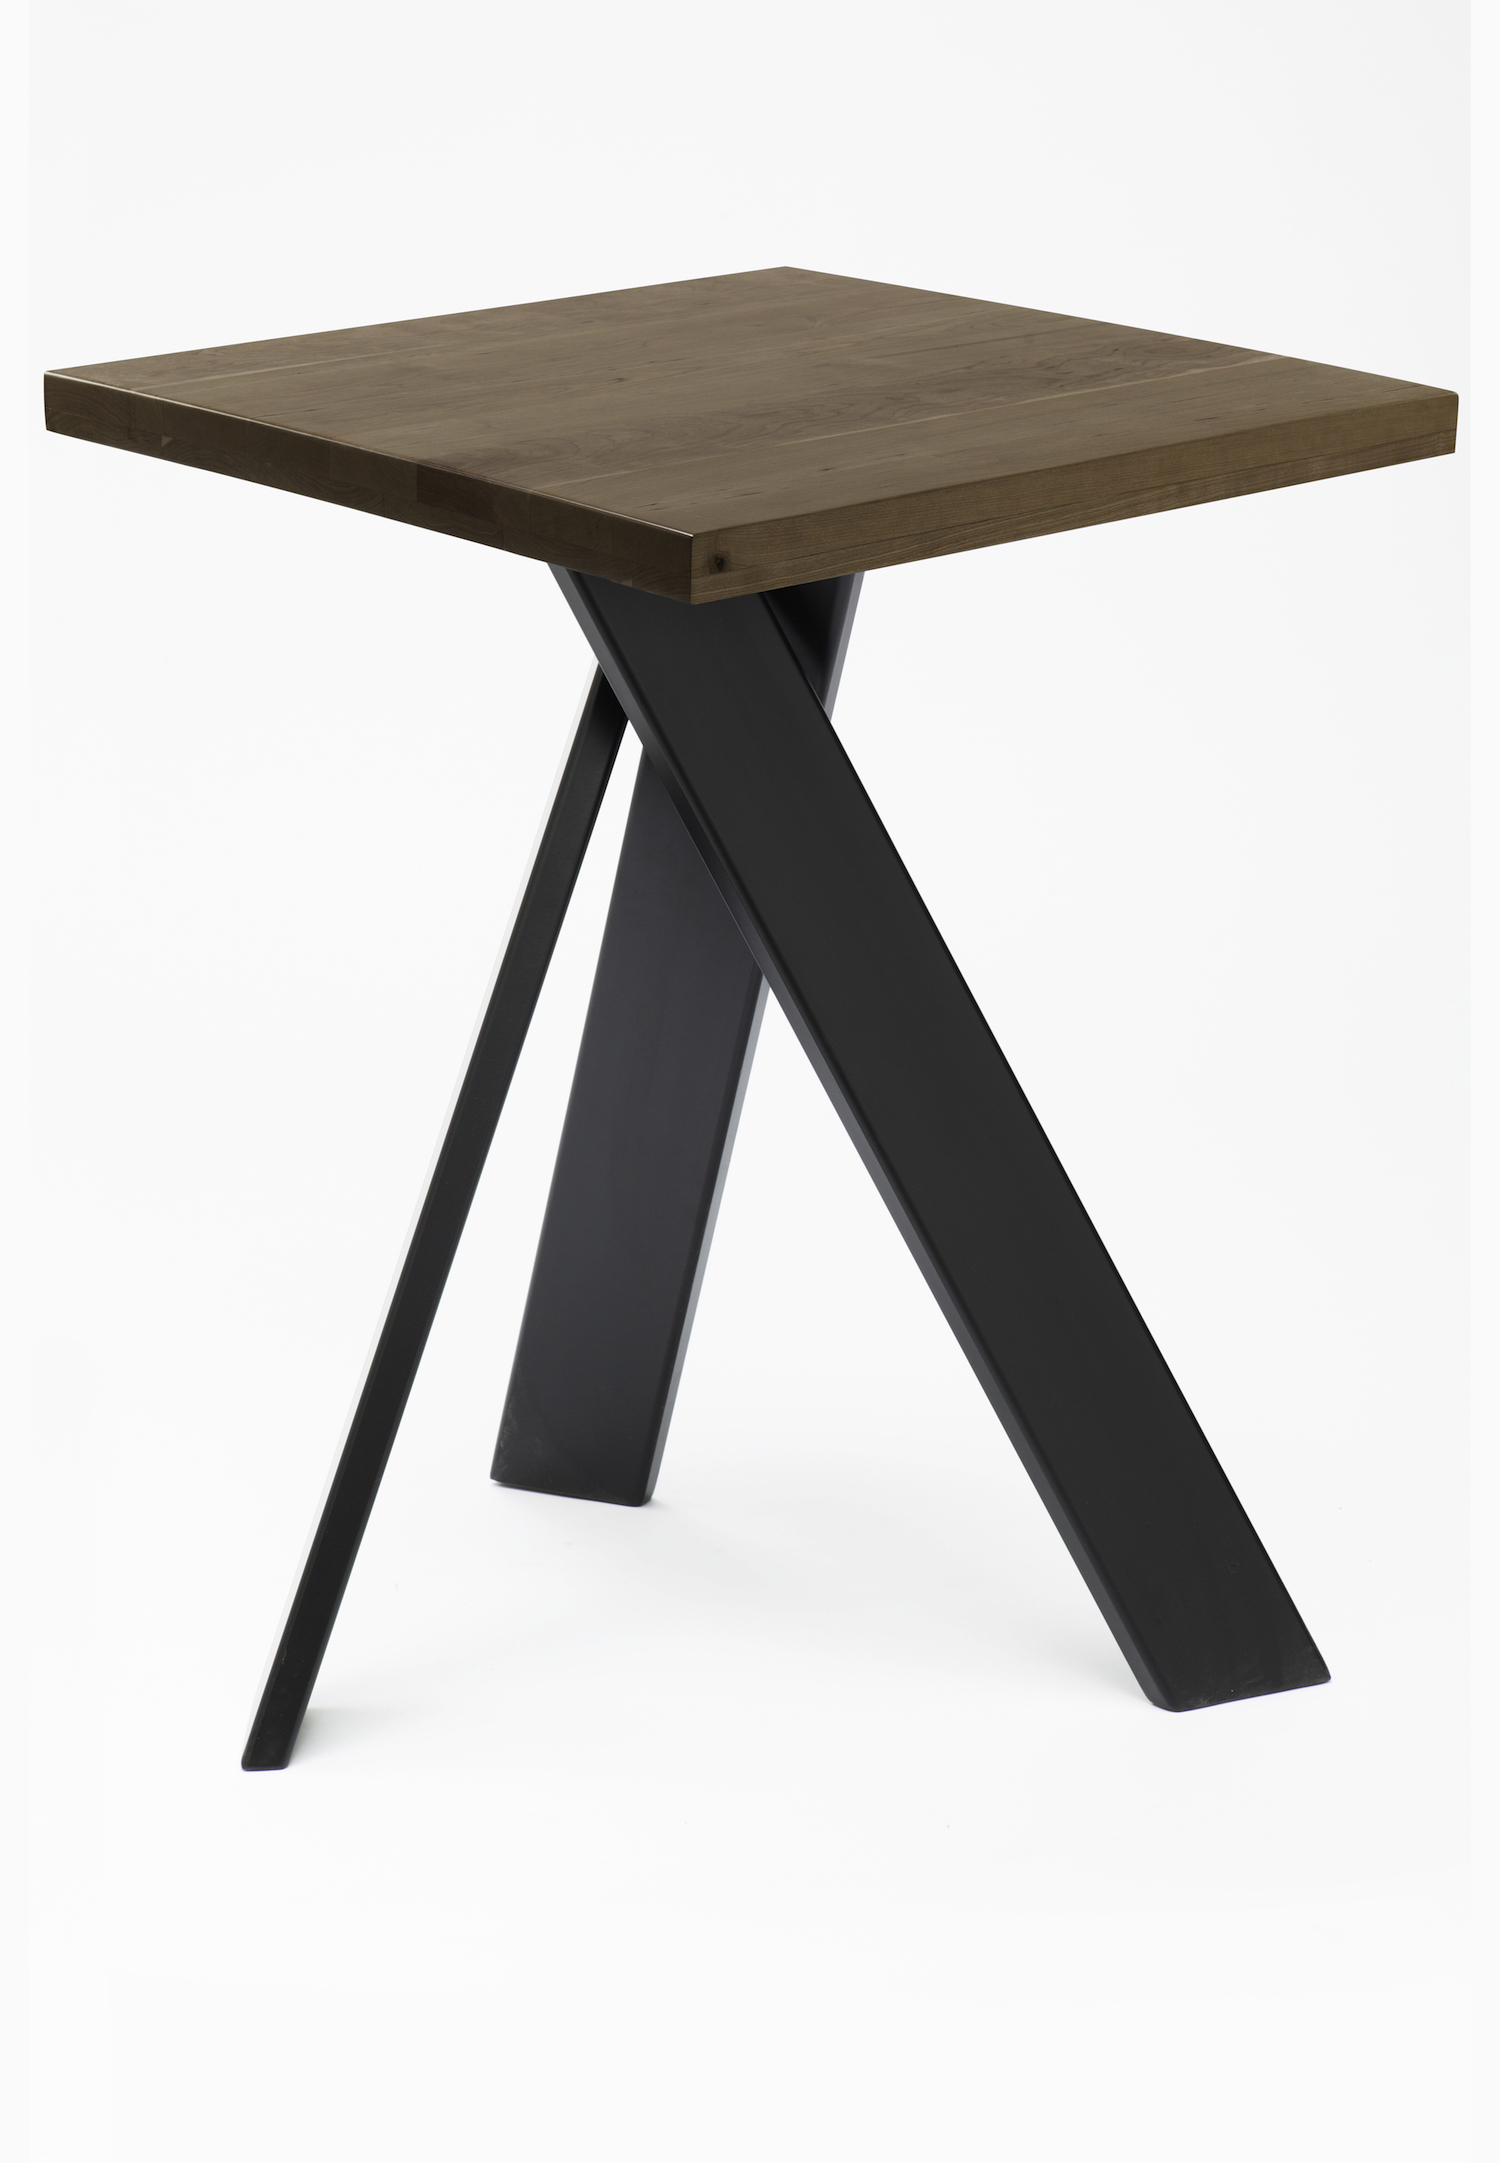 24" x 24" x 30" Dining/Restaurant Table<br>Solid Cherry with Black Powder Coated Base